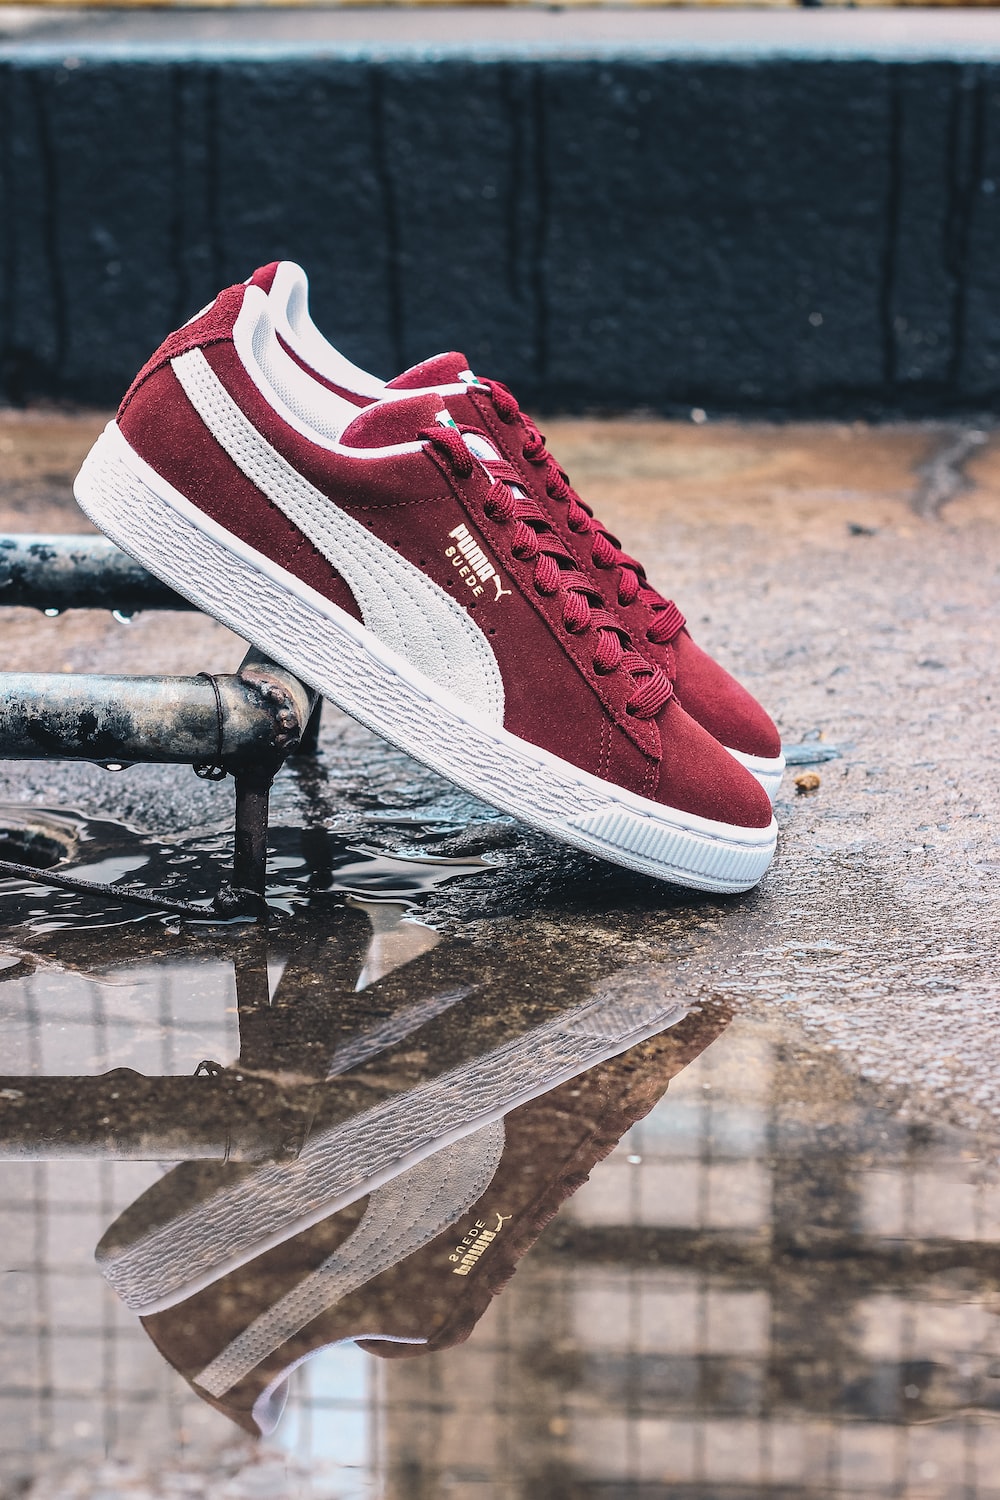 Puma Sneakers Picture. Download Free Image